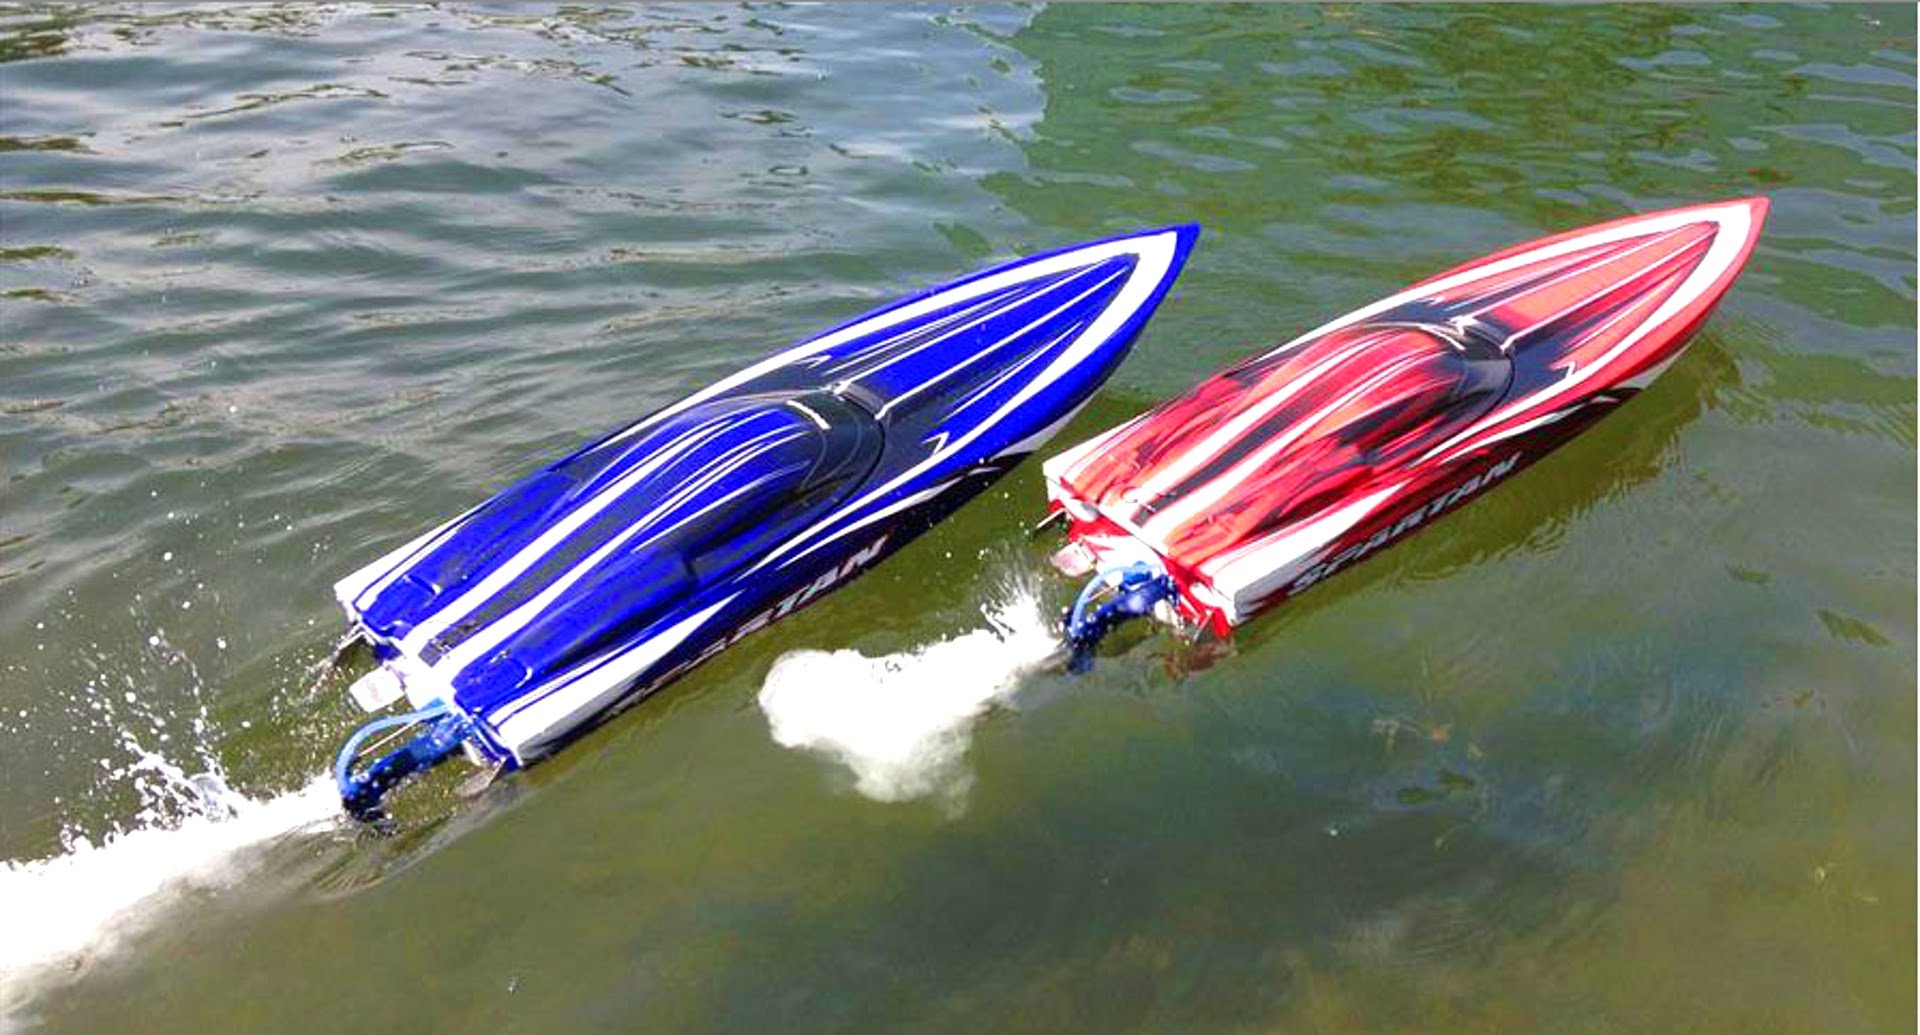 Checkout this perfectly slick boat you gotta go crazy for this mother gripper :)